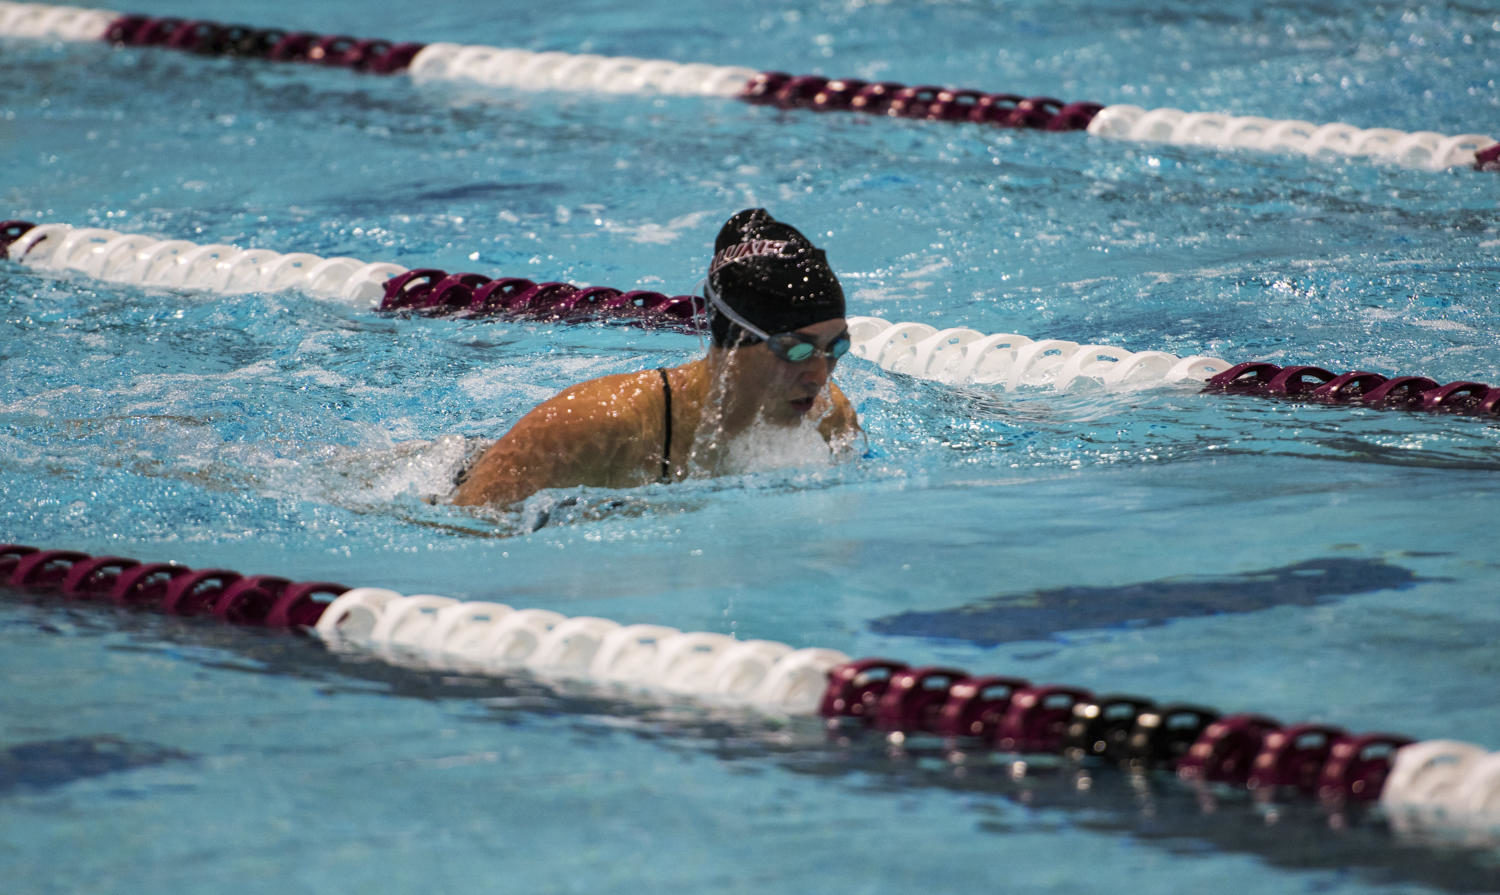 Freshman Cassidy Lounsbury swims the women’s 50-yard breaststroke during the Saluki’s first meet of the season against Lindenwood University on Friday, Sept. 15, 2017, at the Dr. Edward Shea Natatorium. The Salukis ranked low times in six races against the Lions. (Dylan Nelson | Dylan_Nelson99)